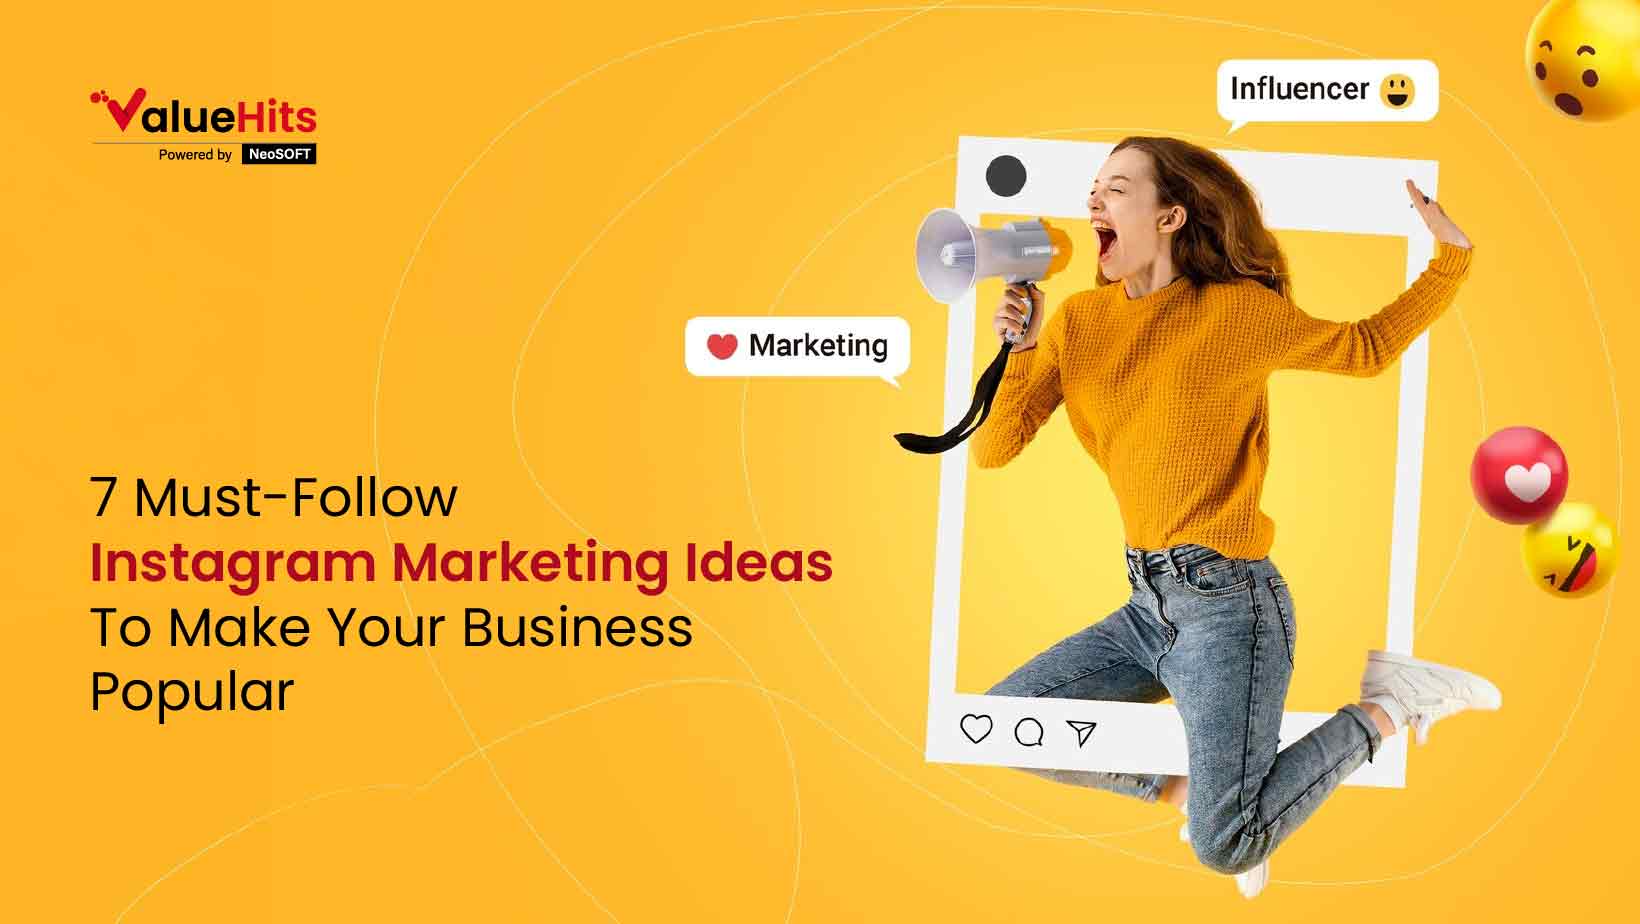 7 Must-Follow Instagram Marketing Ideas To Make Your Business Popular